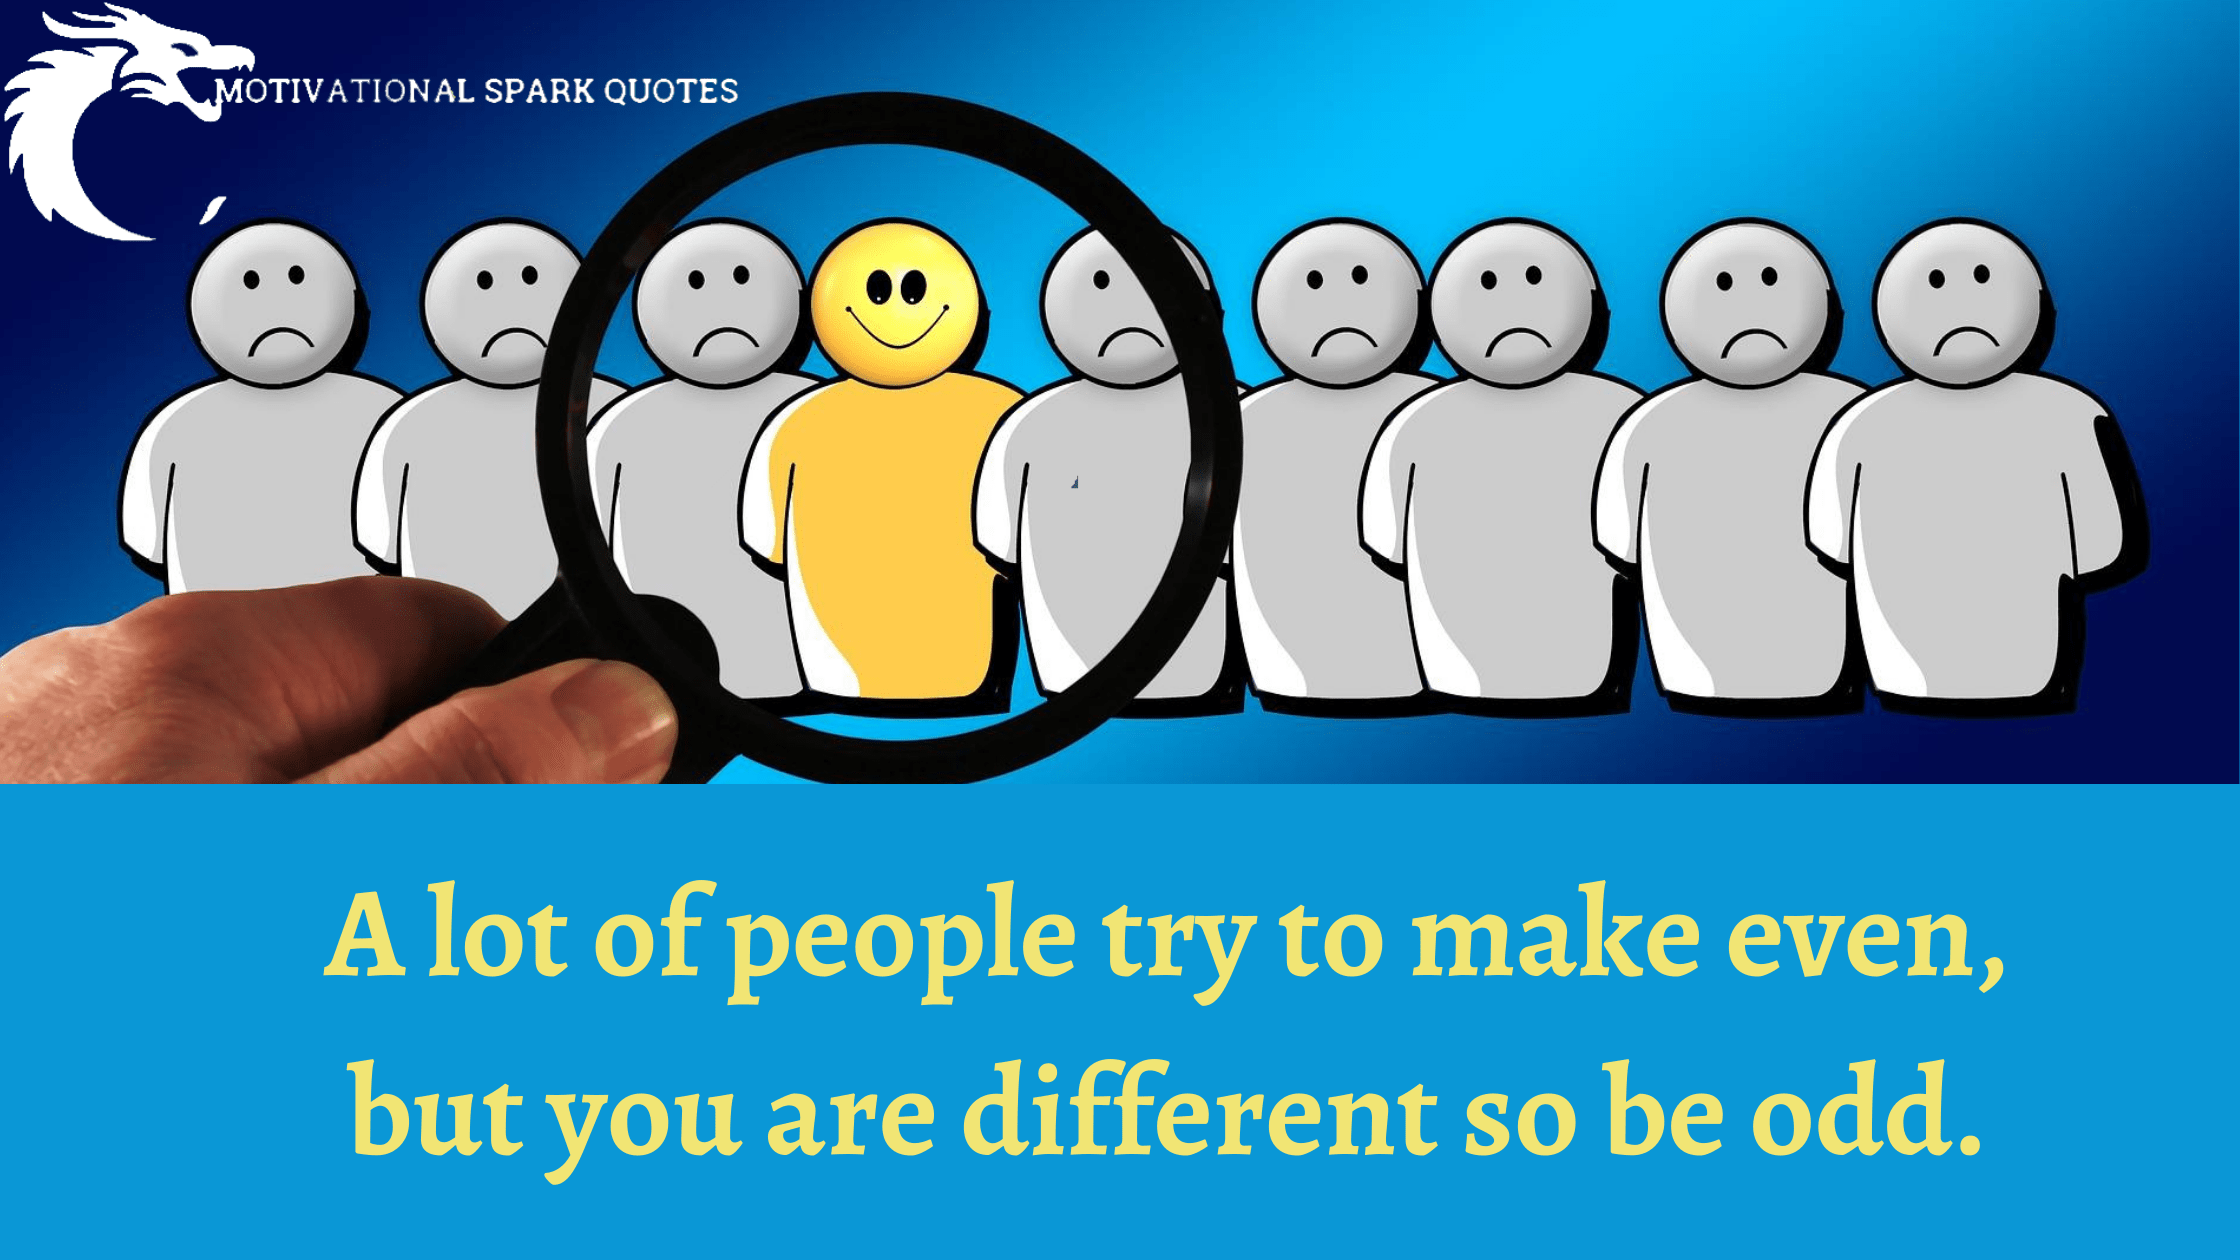 Quotes about being different